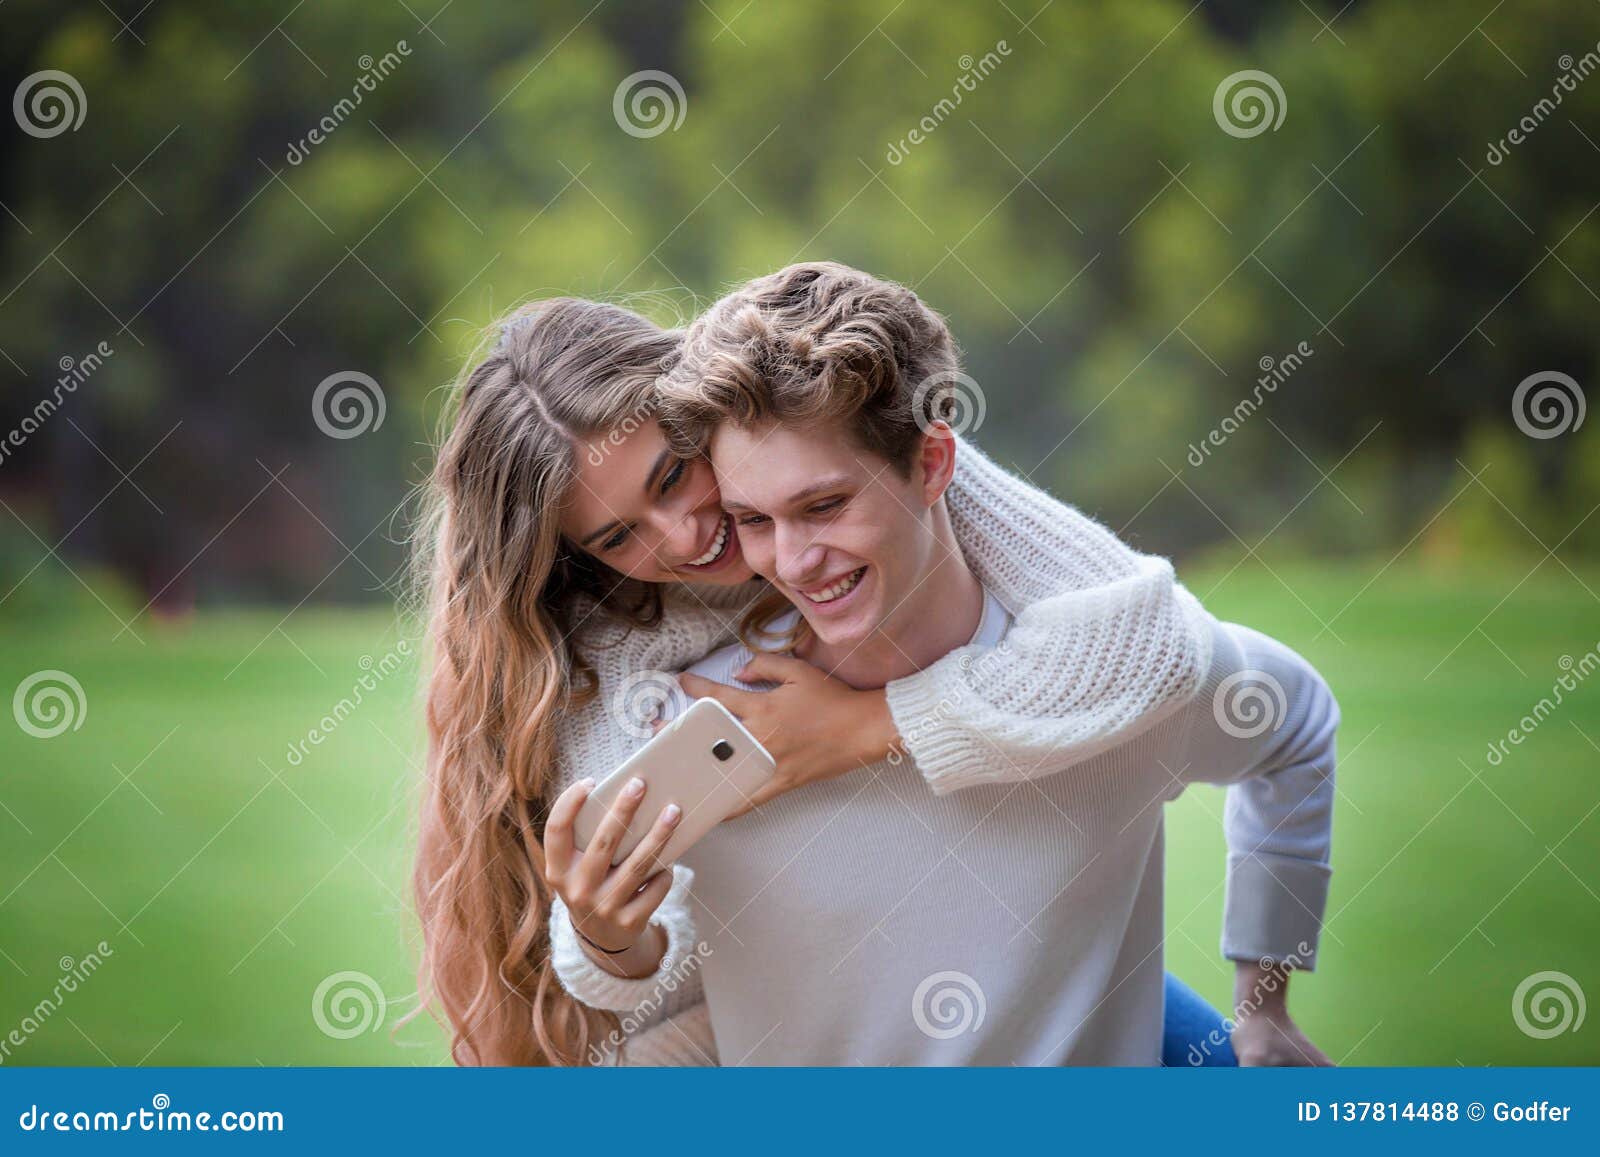 young couple smiling at camera selfie